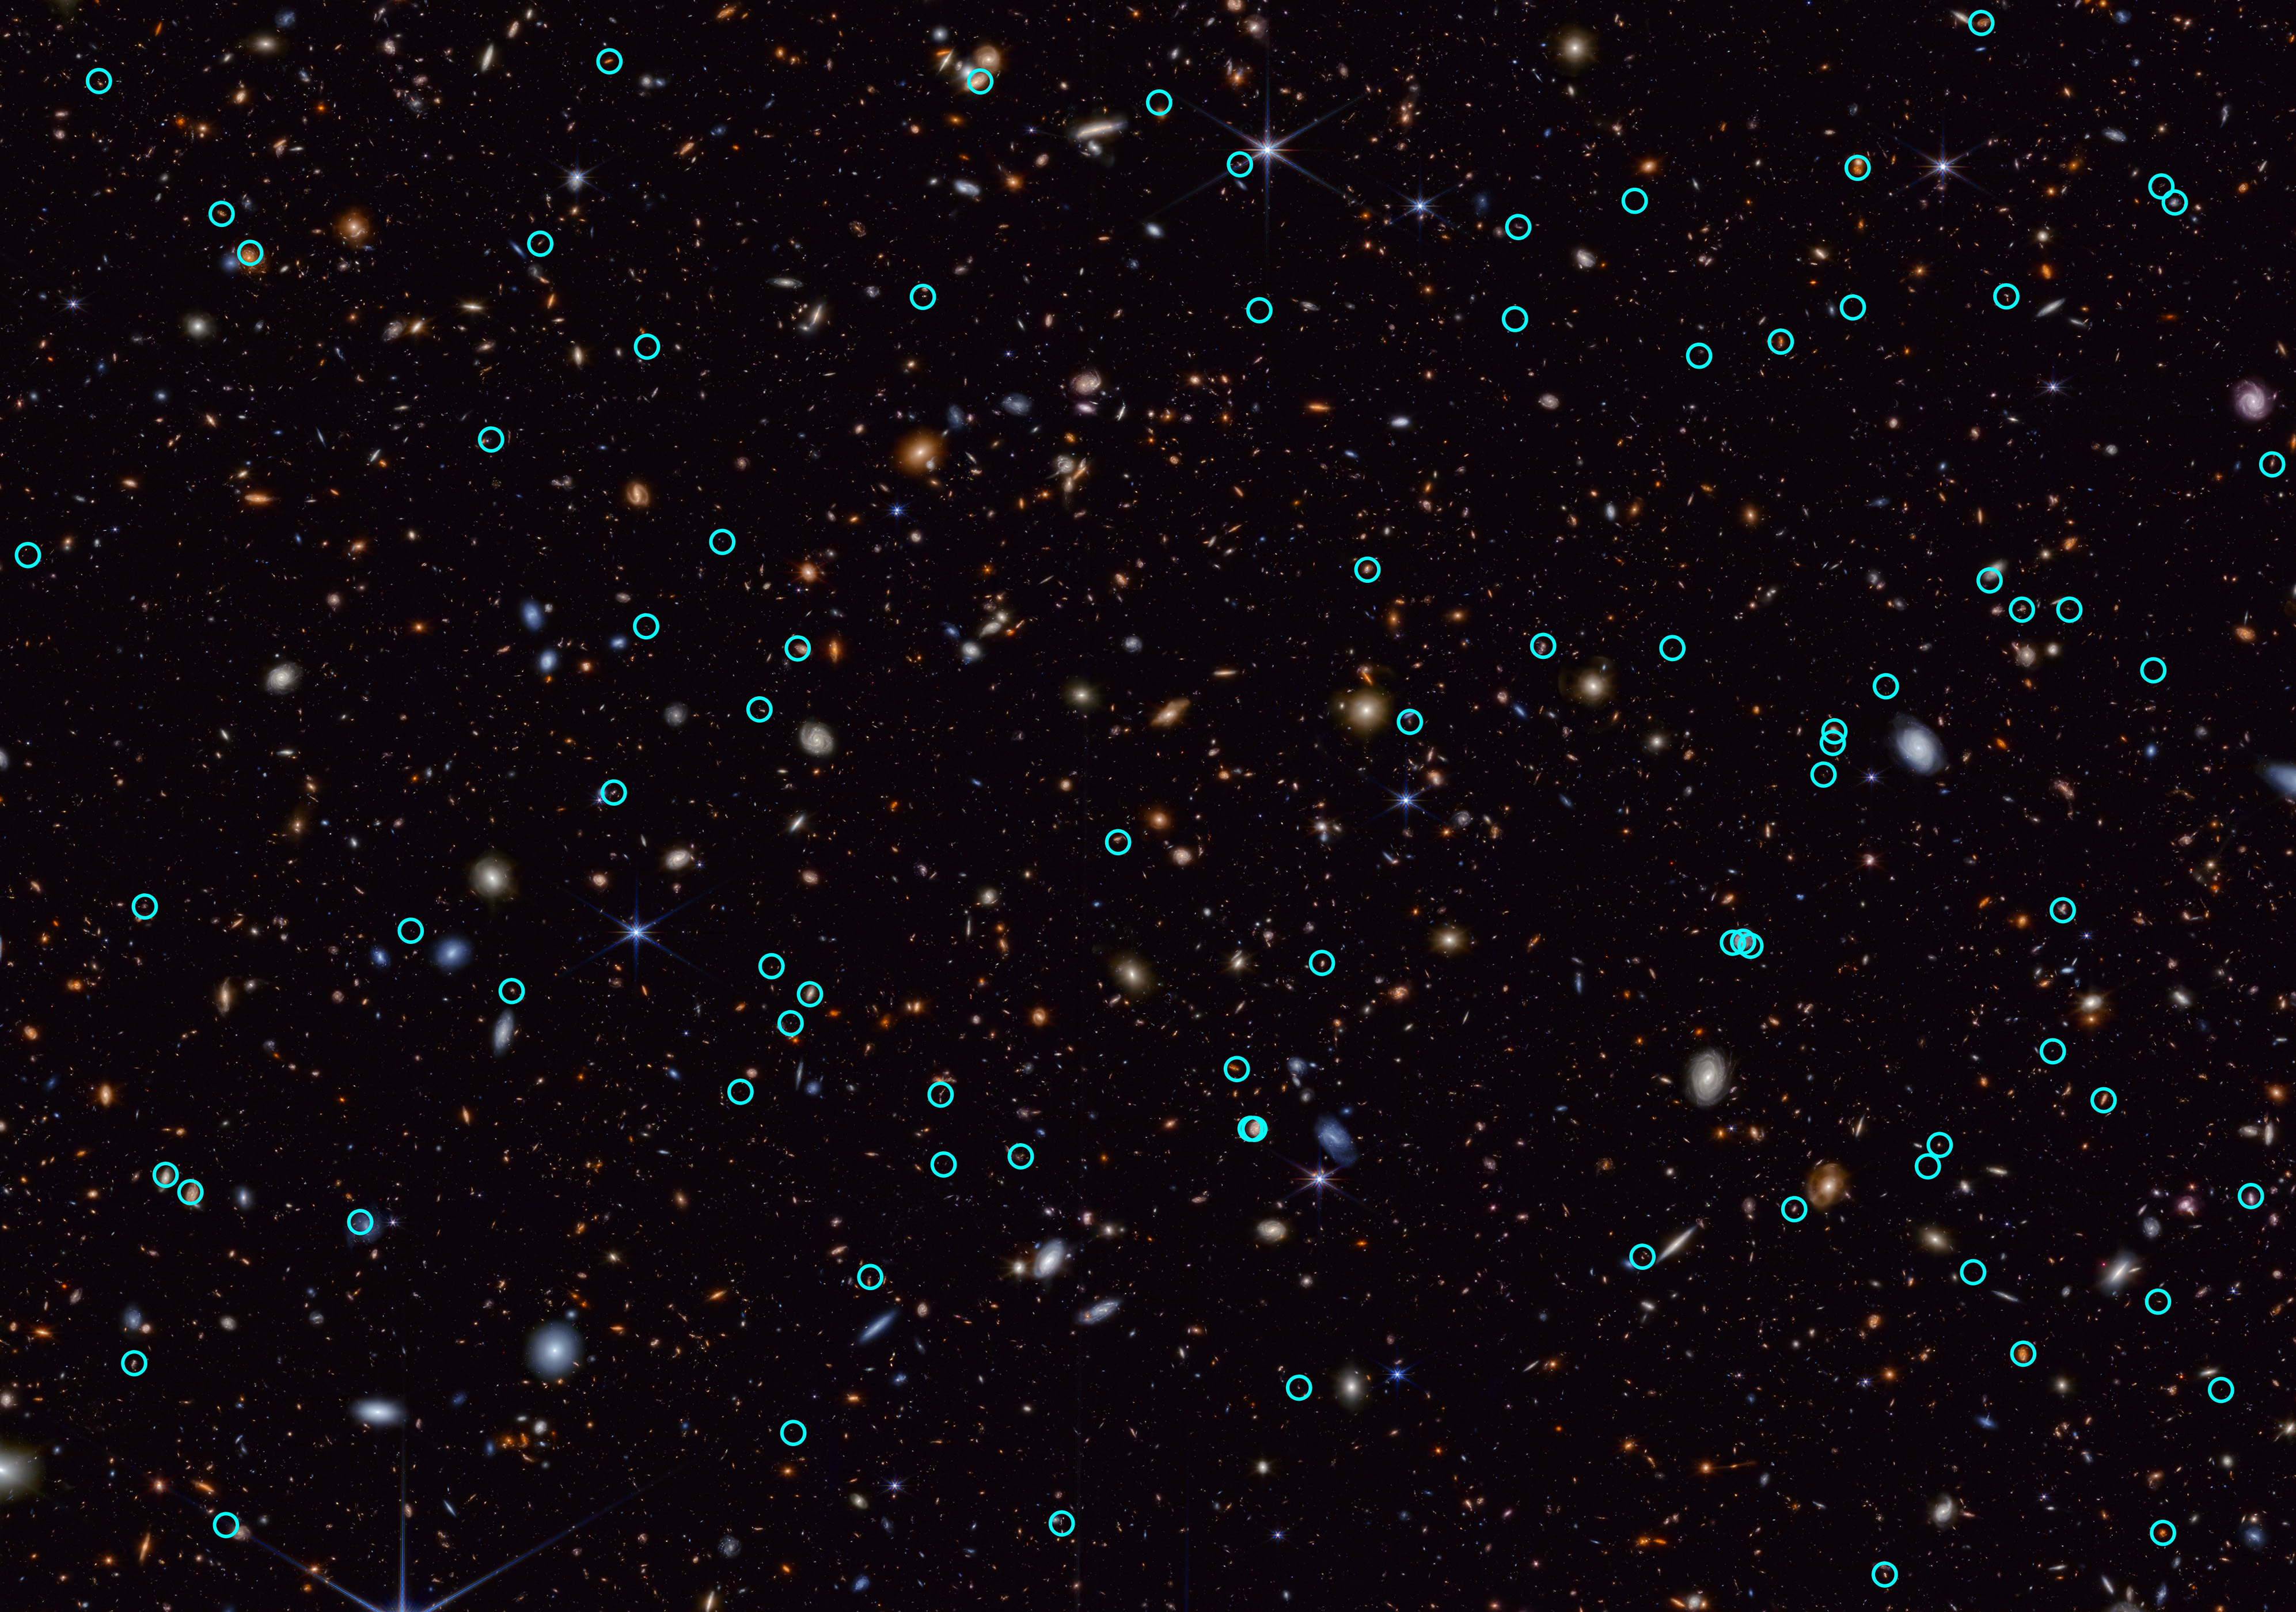 Space telescope image showing hundreds of objects of different colors, shapes, and sizes scattered across the black background of space, with about 80 of the objects circled in green.